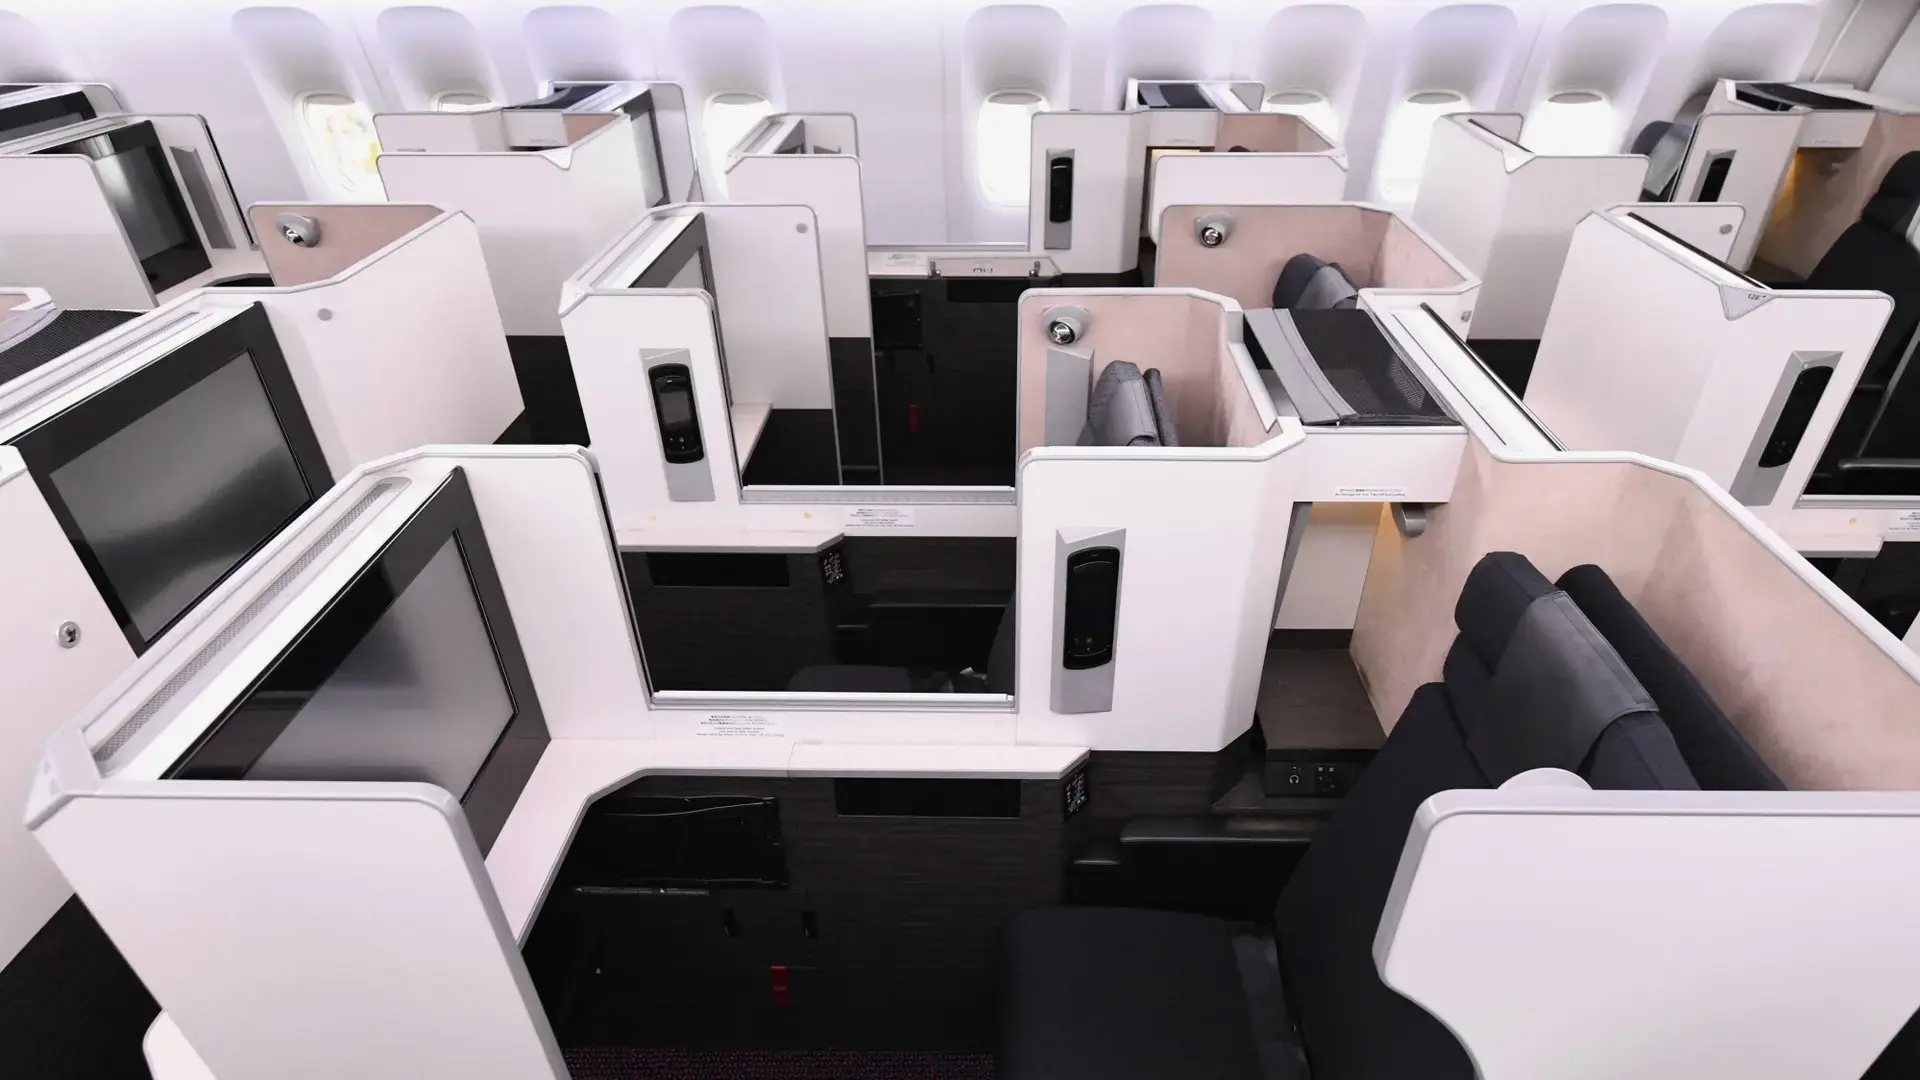 Japan Airlines business class seats